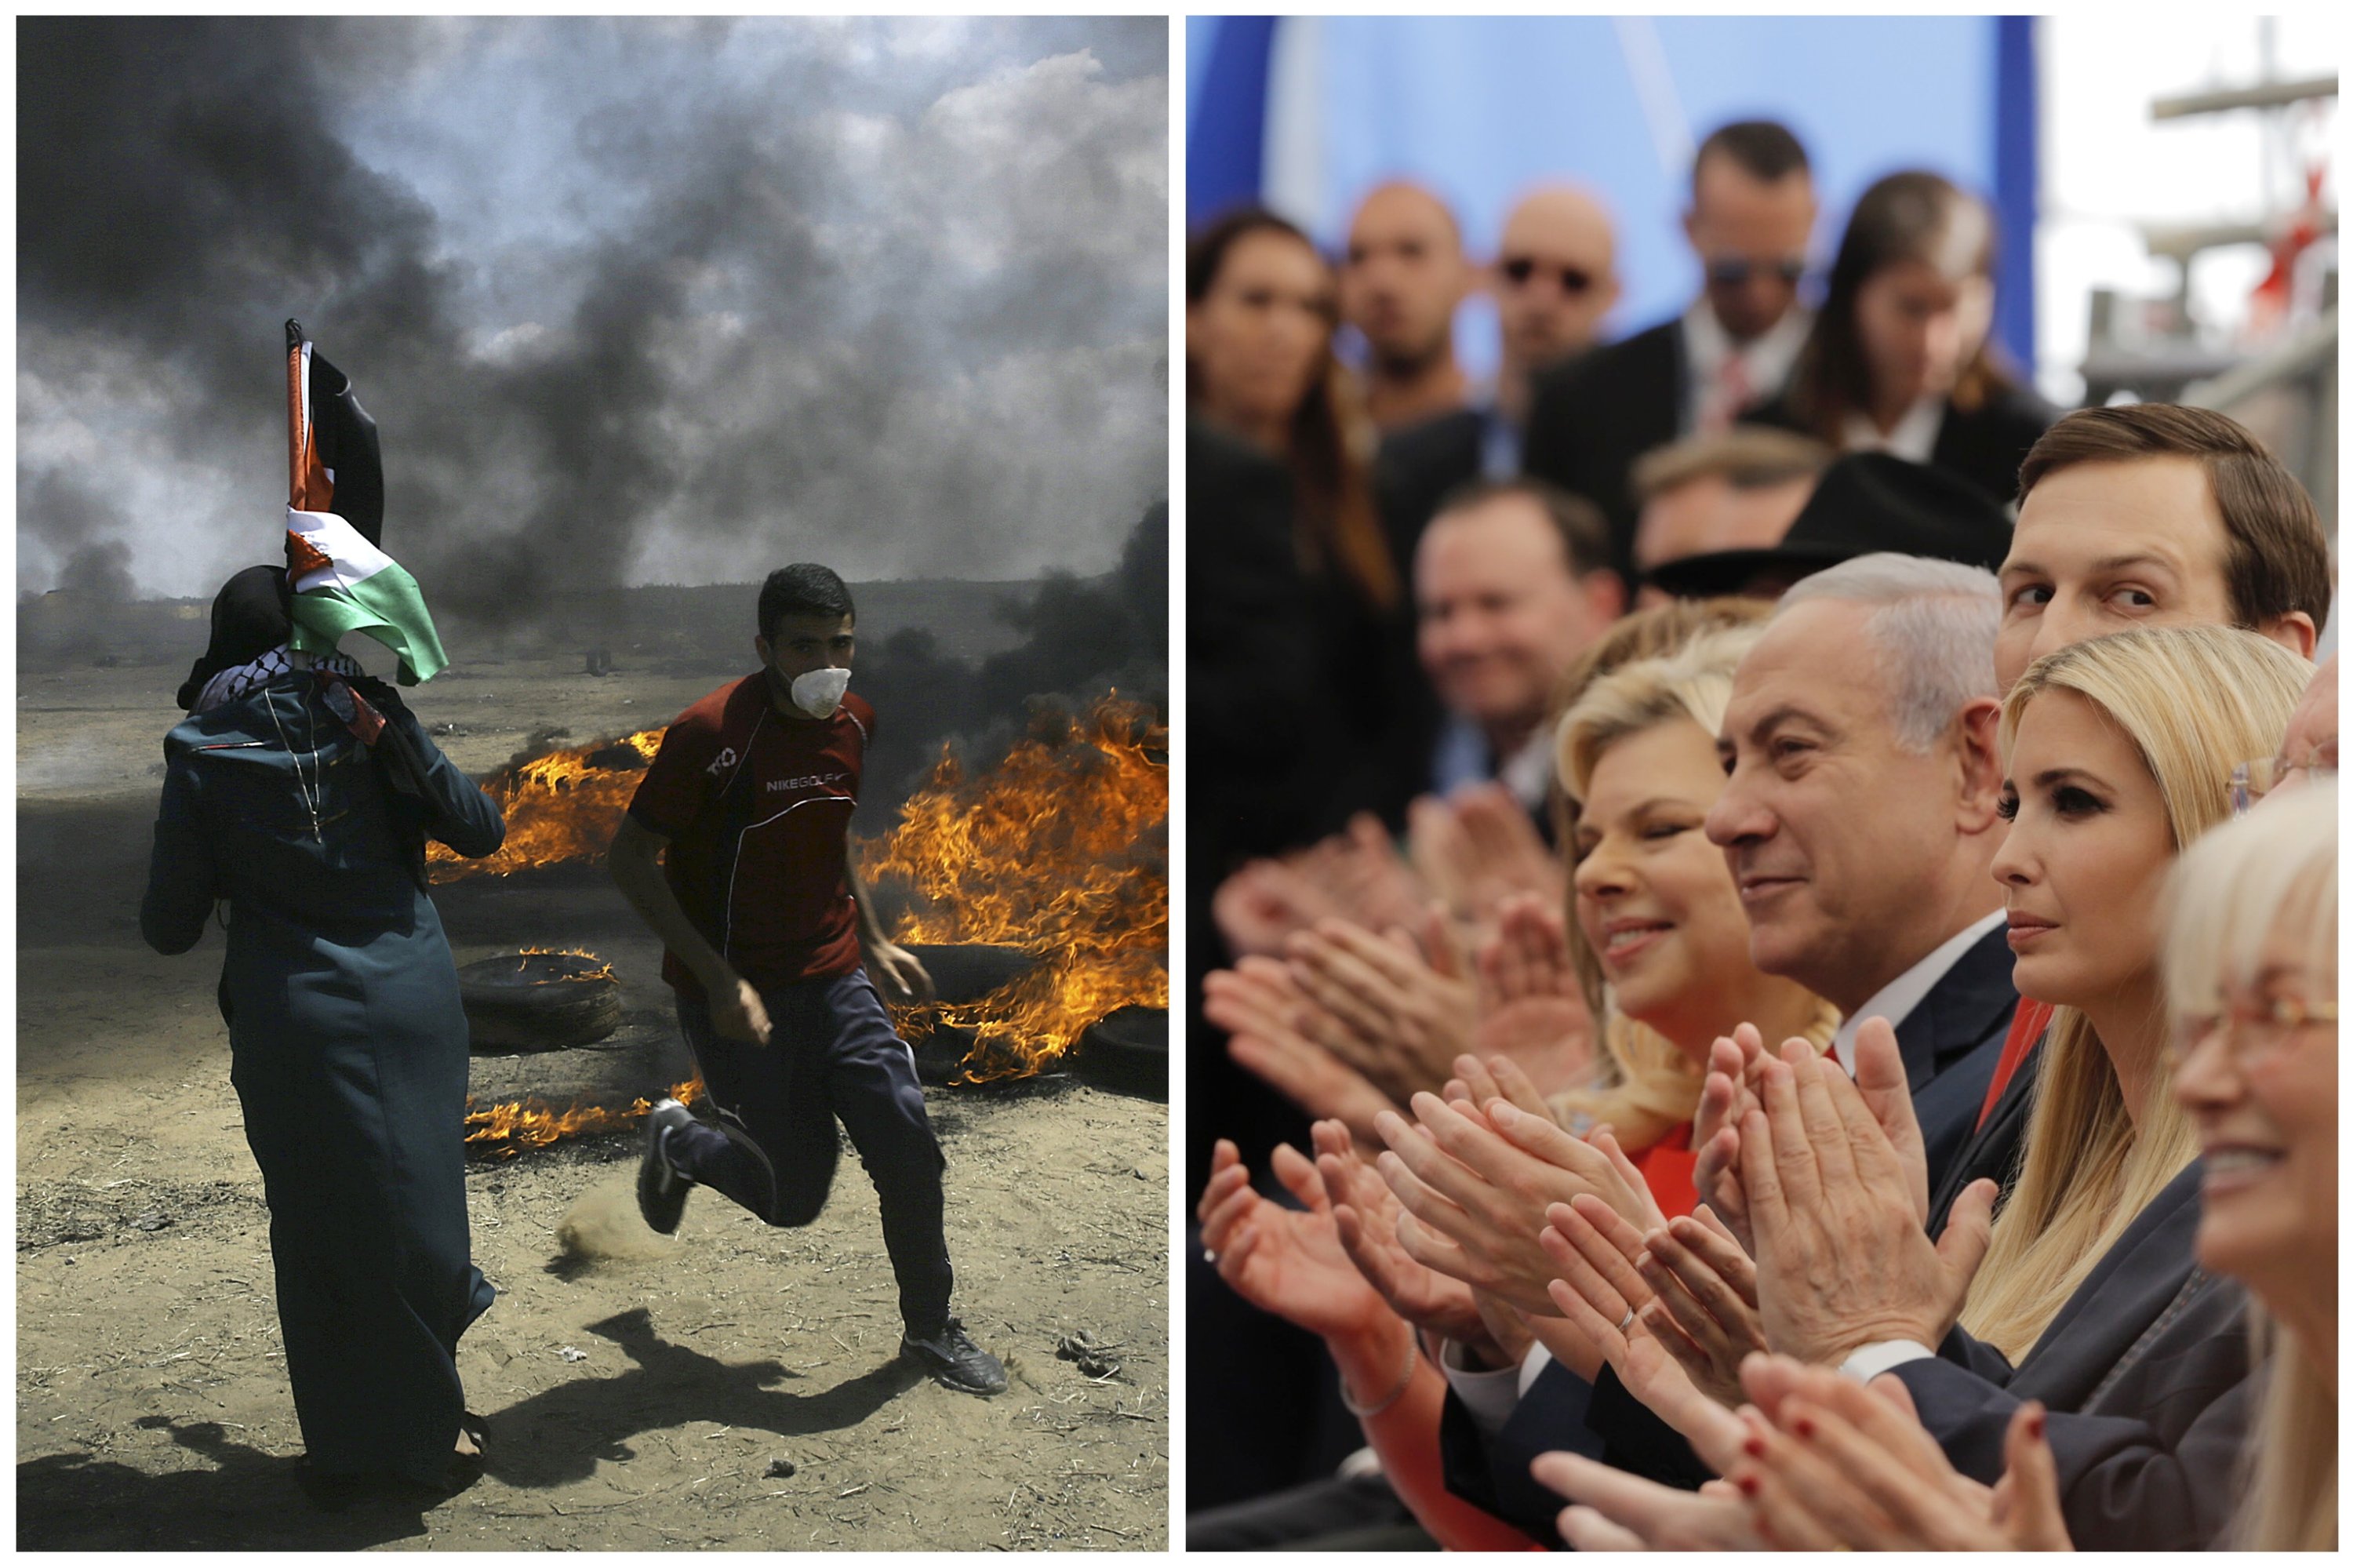 In this photo combination, Palestinians protest near the border of Israel and the Gaza Strip (L) and, on the same day dignitaries, (from left to right), Sara Netanyahu, her husband Israeli Prime Minister Benjamin Netanyahu, Senior White House Advisor Jared Kushner, and U.S. President Donald Trump's daughter, Ivanka Trump, applaud at the opening ceremony of the new U.S. embassy in Jerusalem, occupied Palestine, May 14, 2018. (AP Photo)